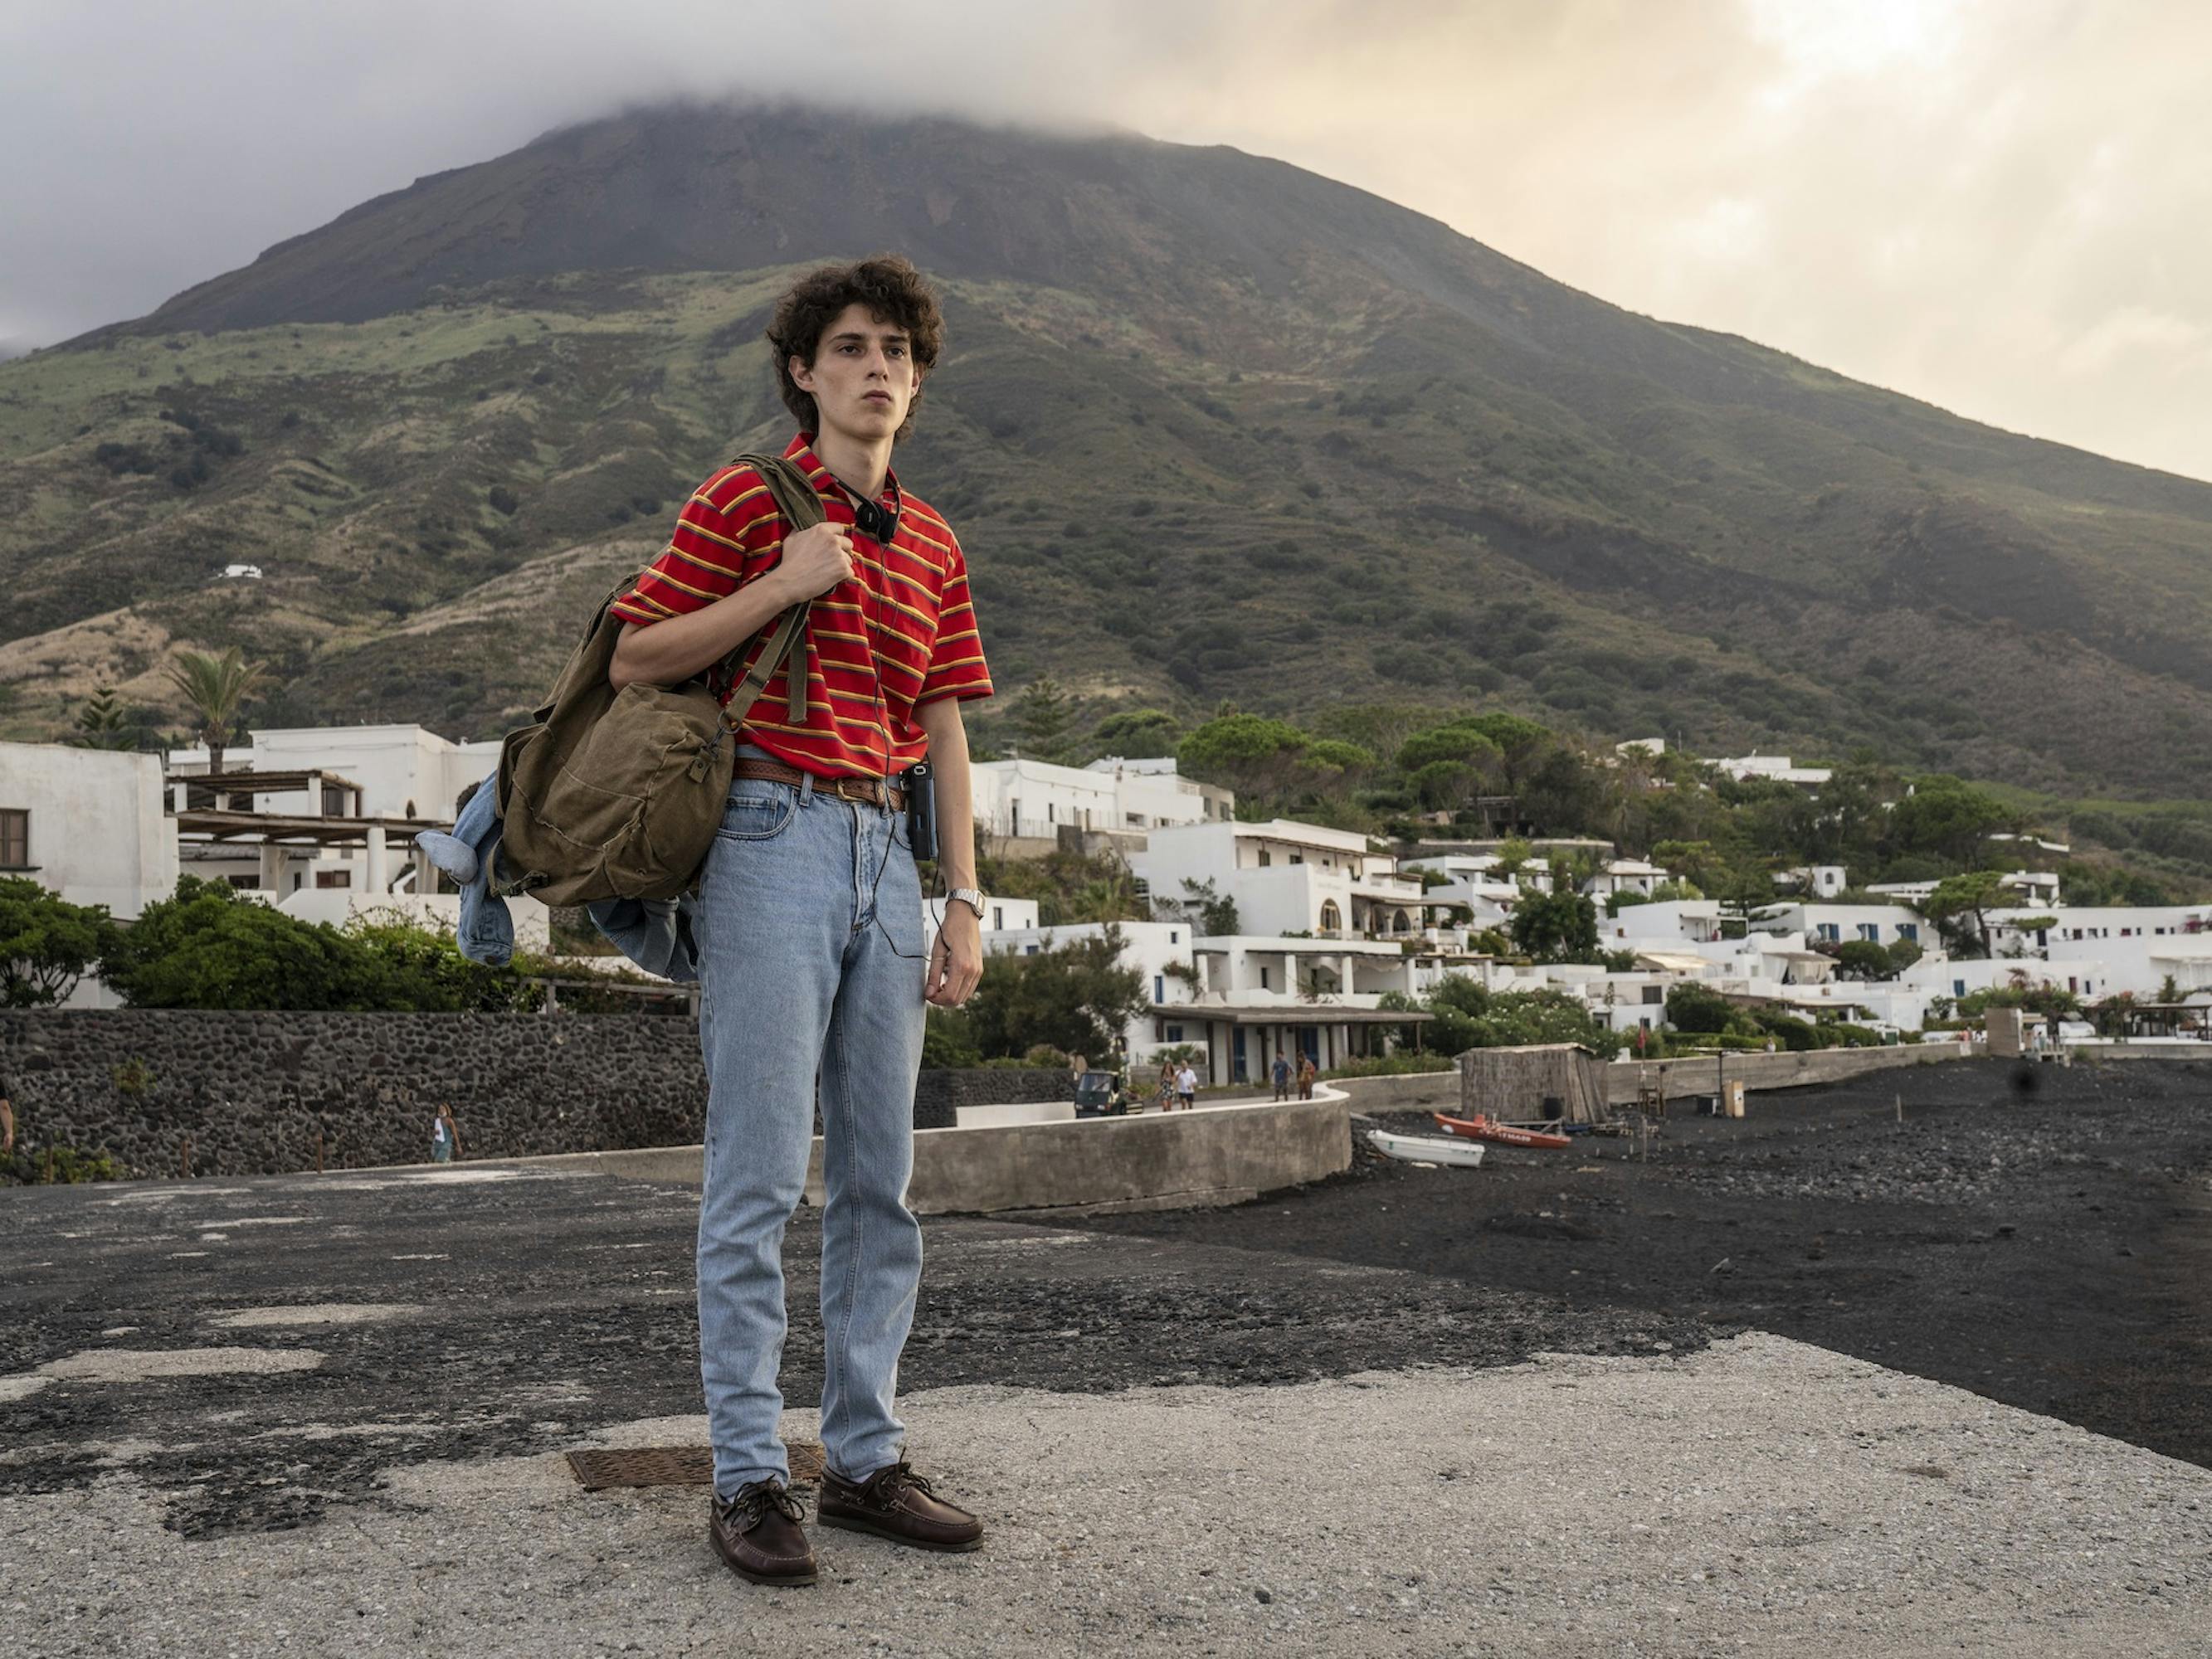 Fabietto Schisa (Filippo Scotti) wears blue jeans, brown loafers, a red striped collared shirt, and a brown bag slung over his shoulder. Behind him is a bushy green mountain, and white houses.